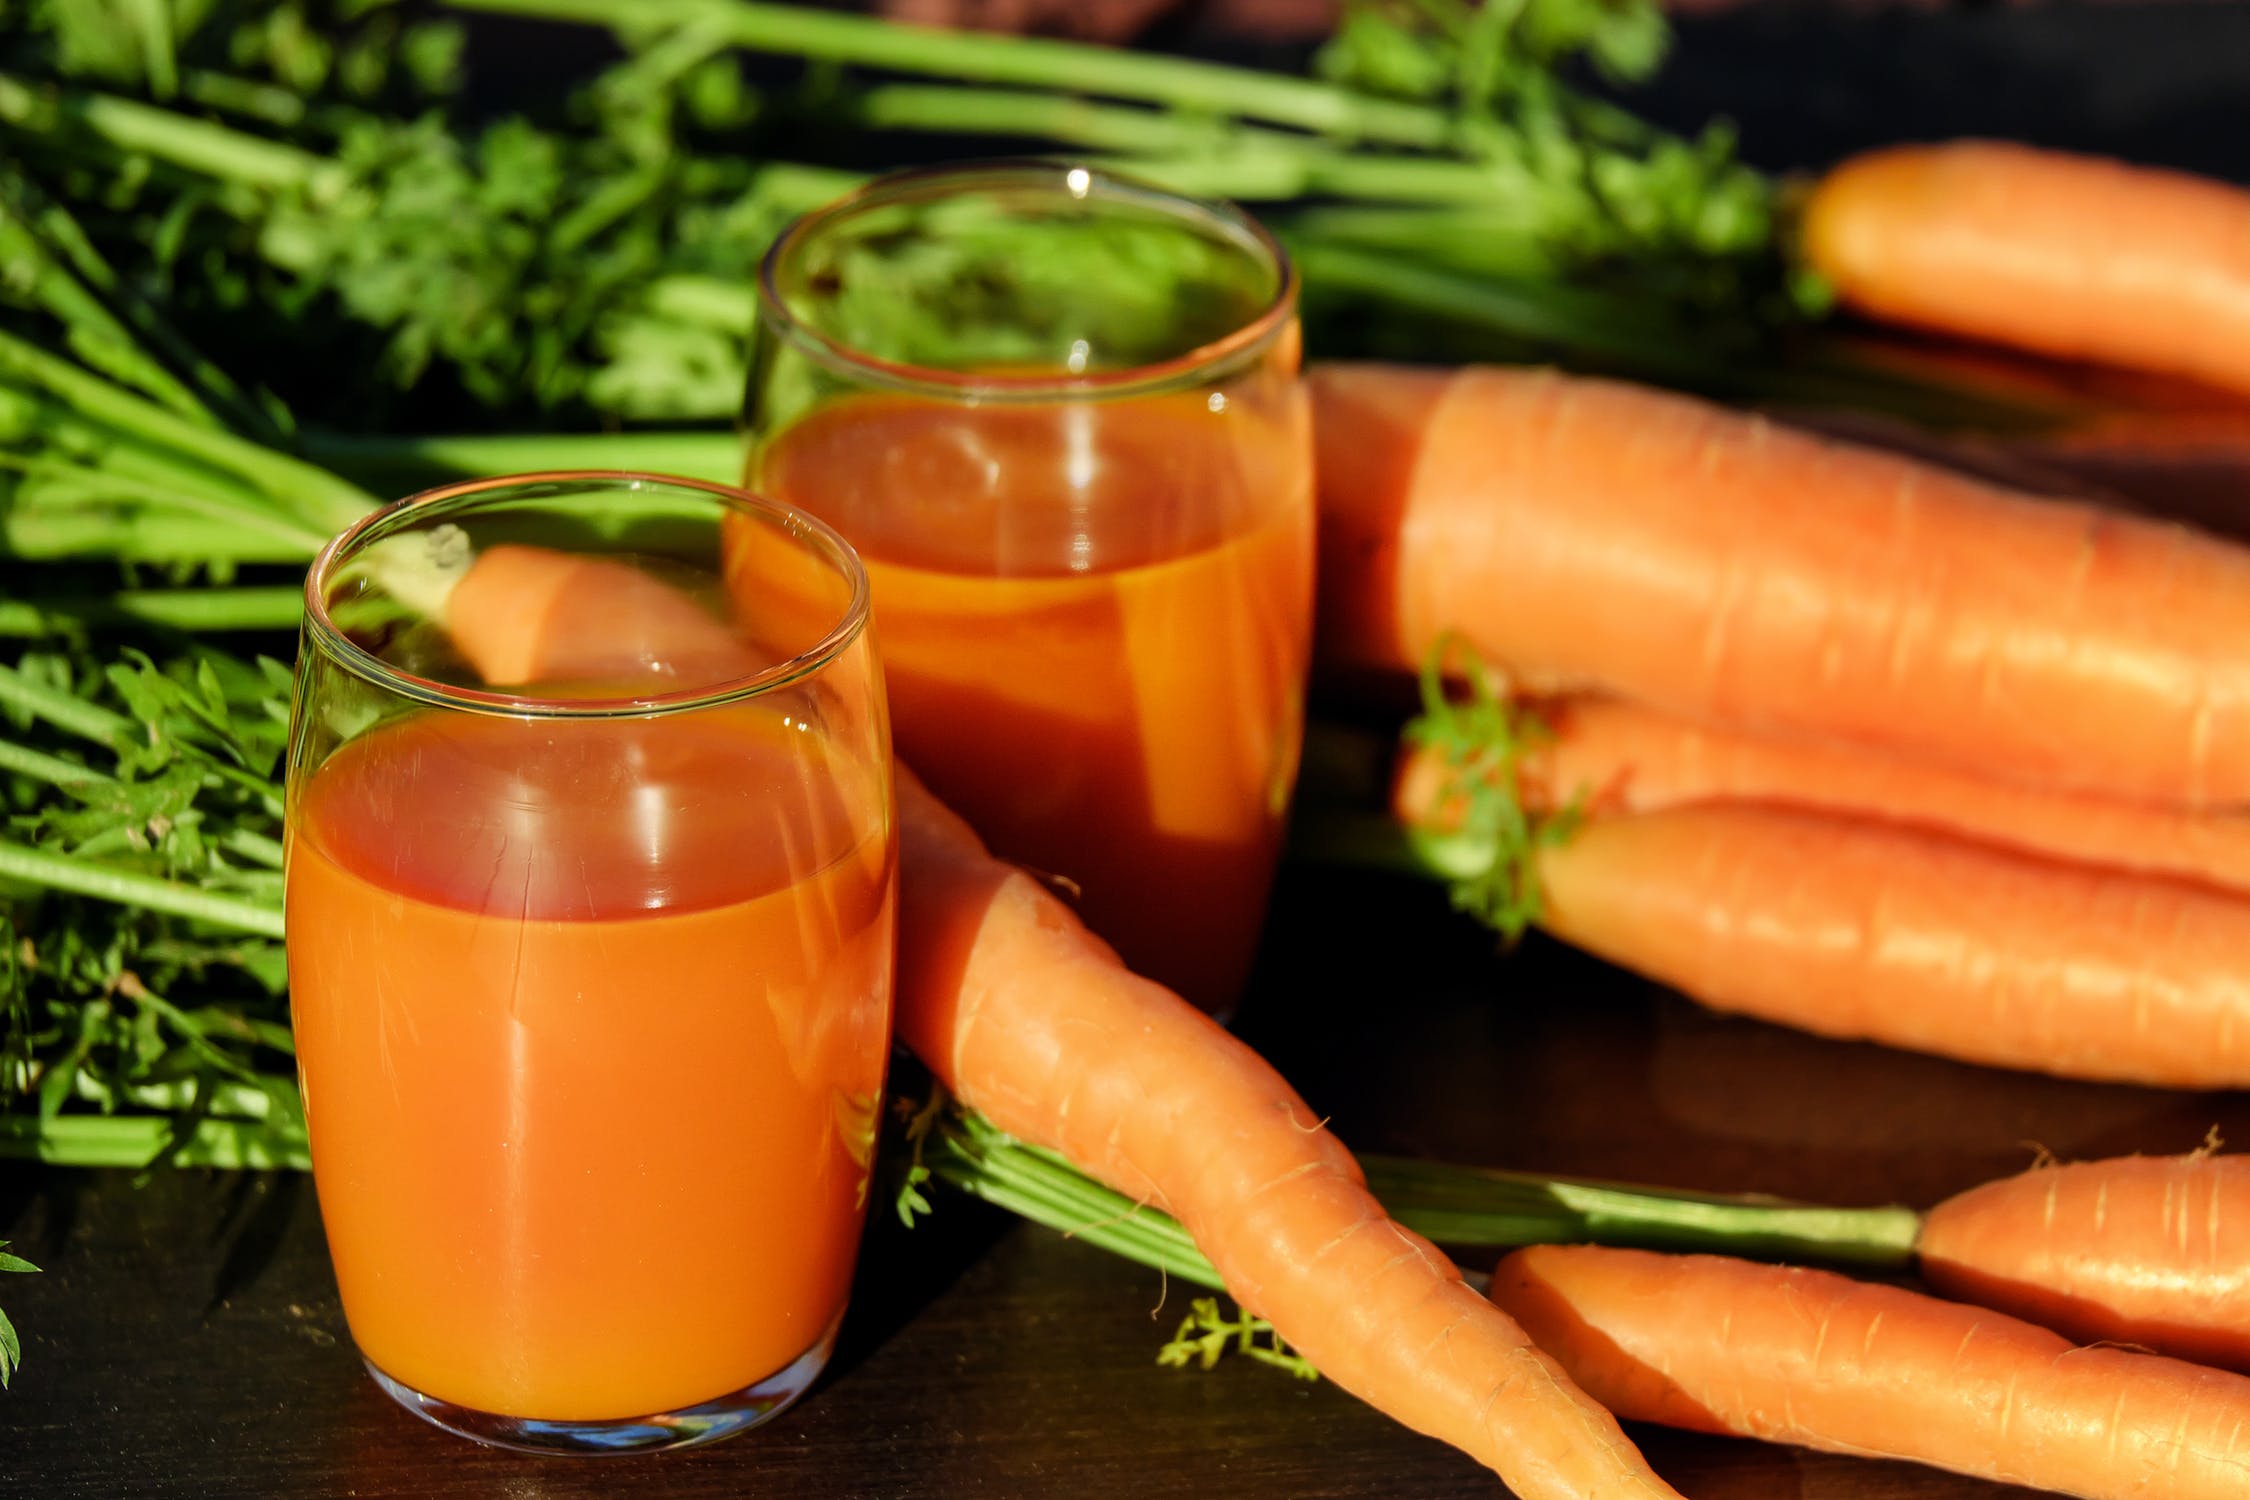 curing cancer with carrots - carrot juice and carrots pic